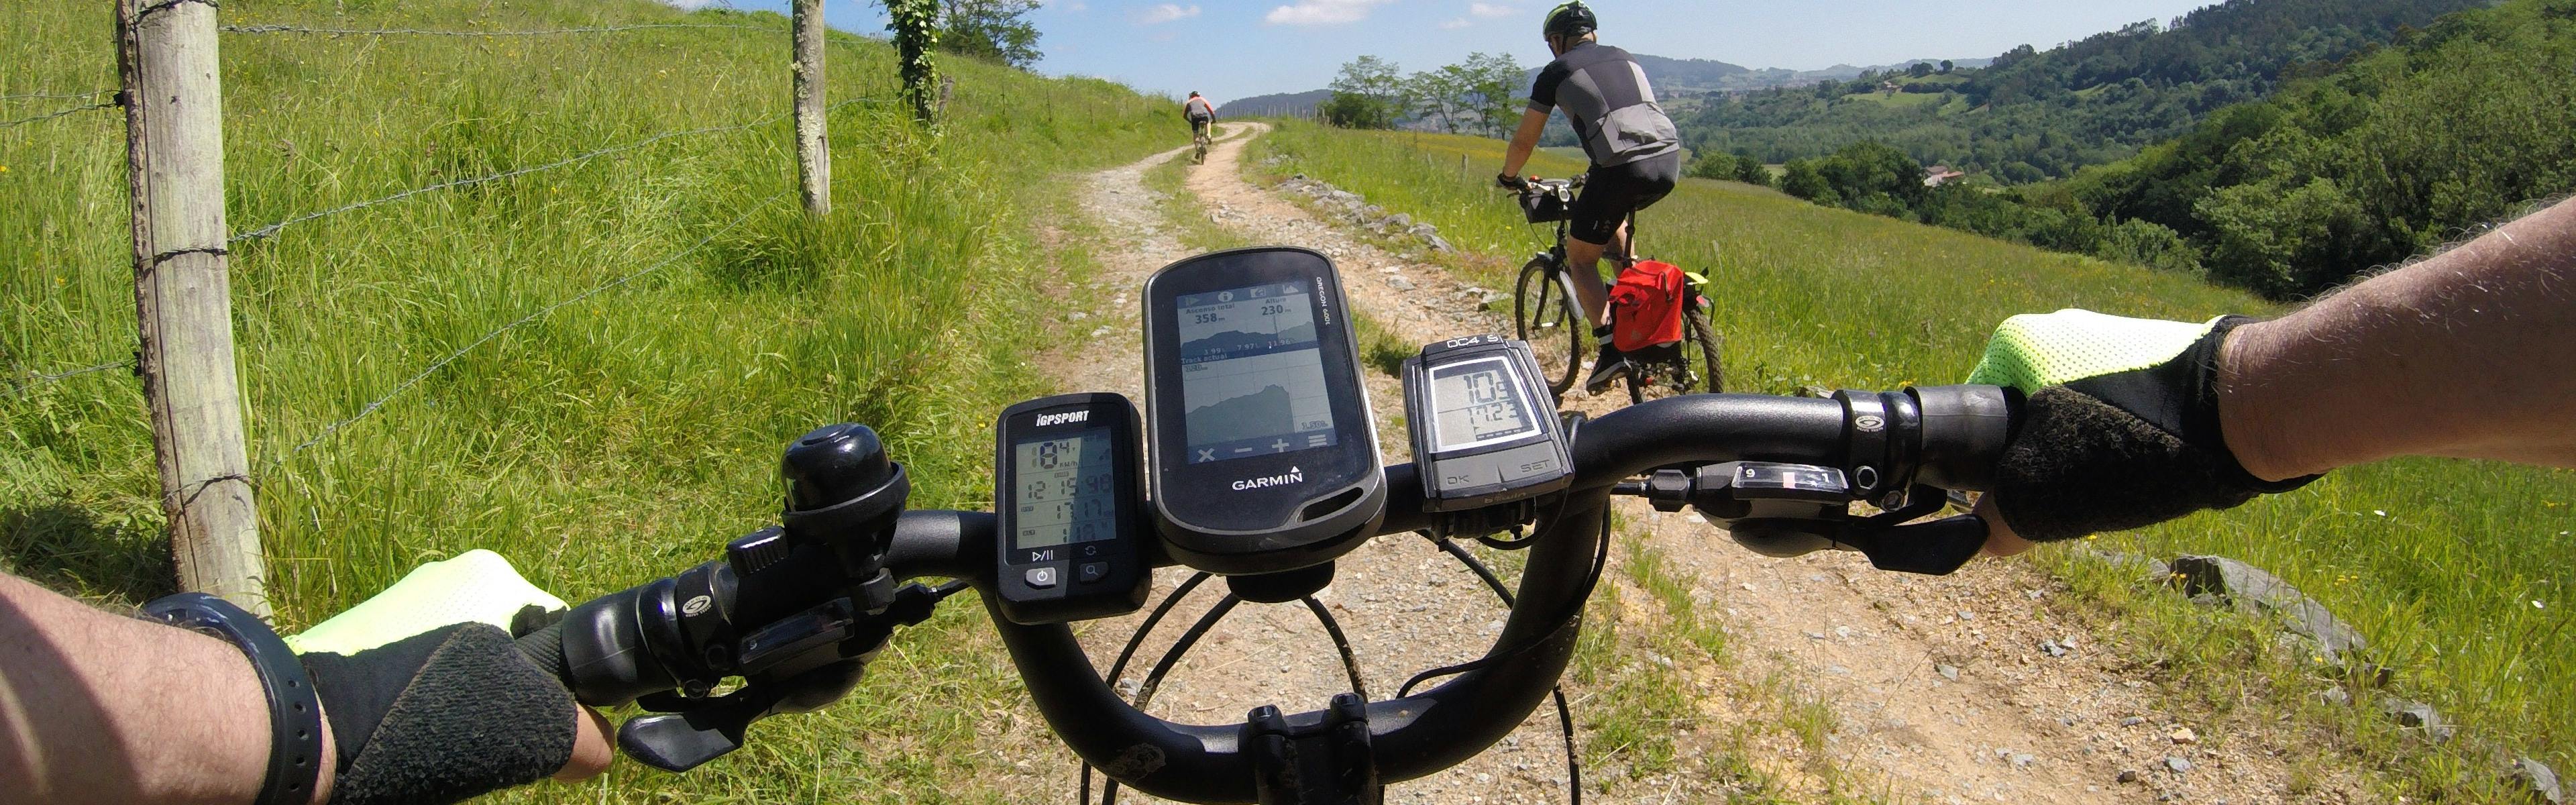 An Expert Guide to the Garmin Cycling Computers | Curated.com